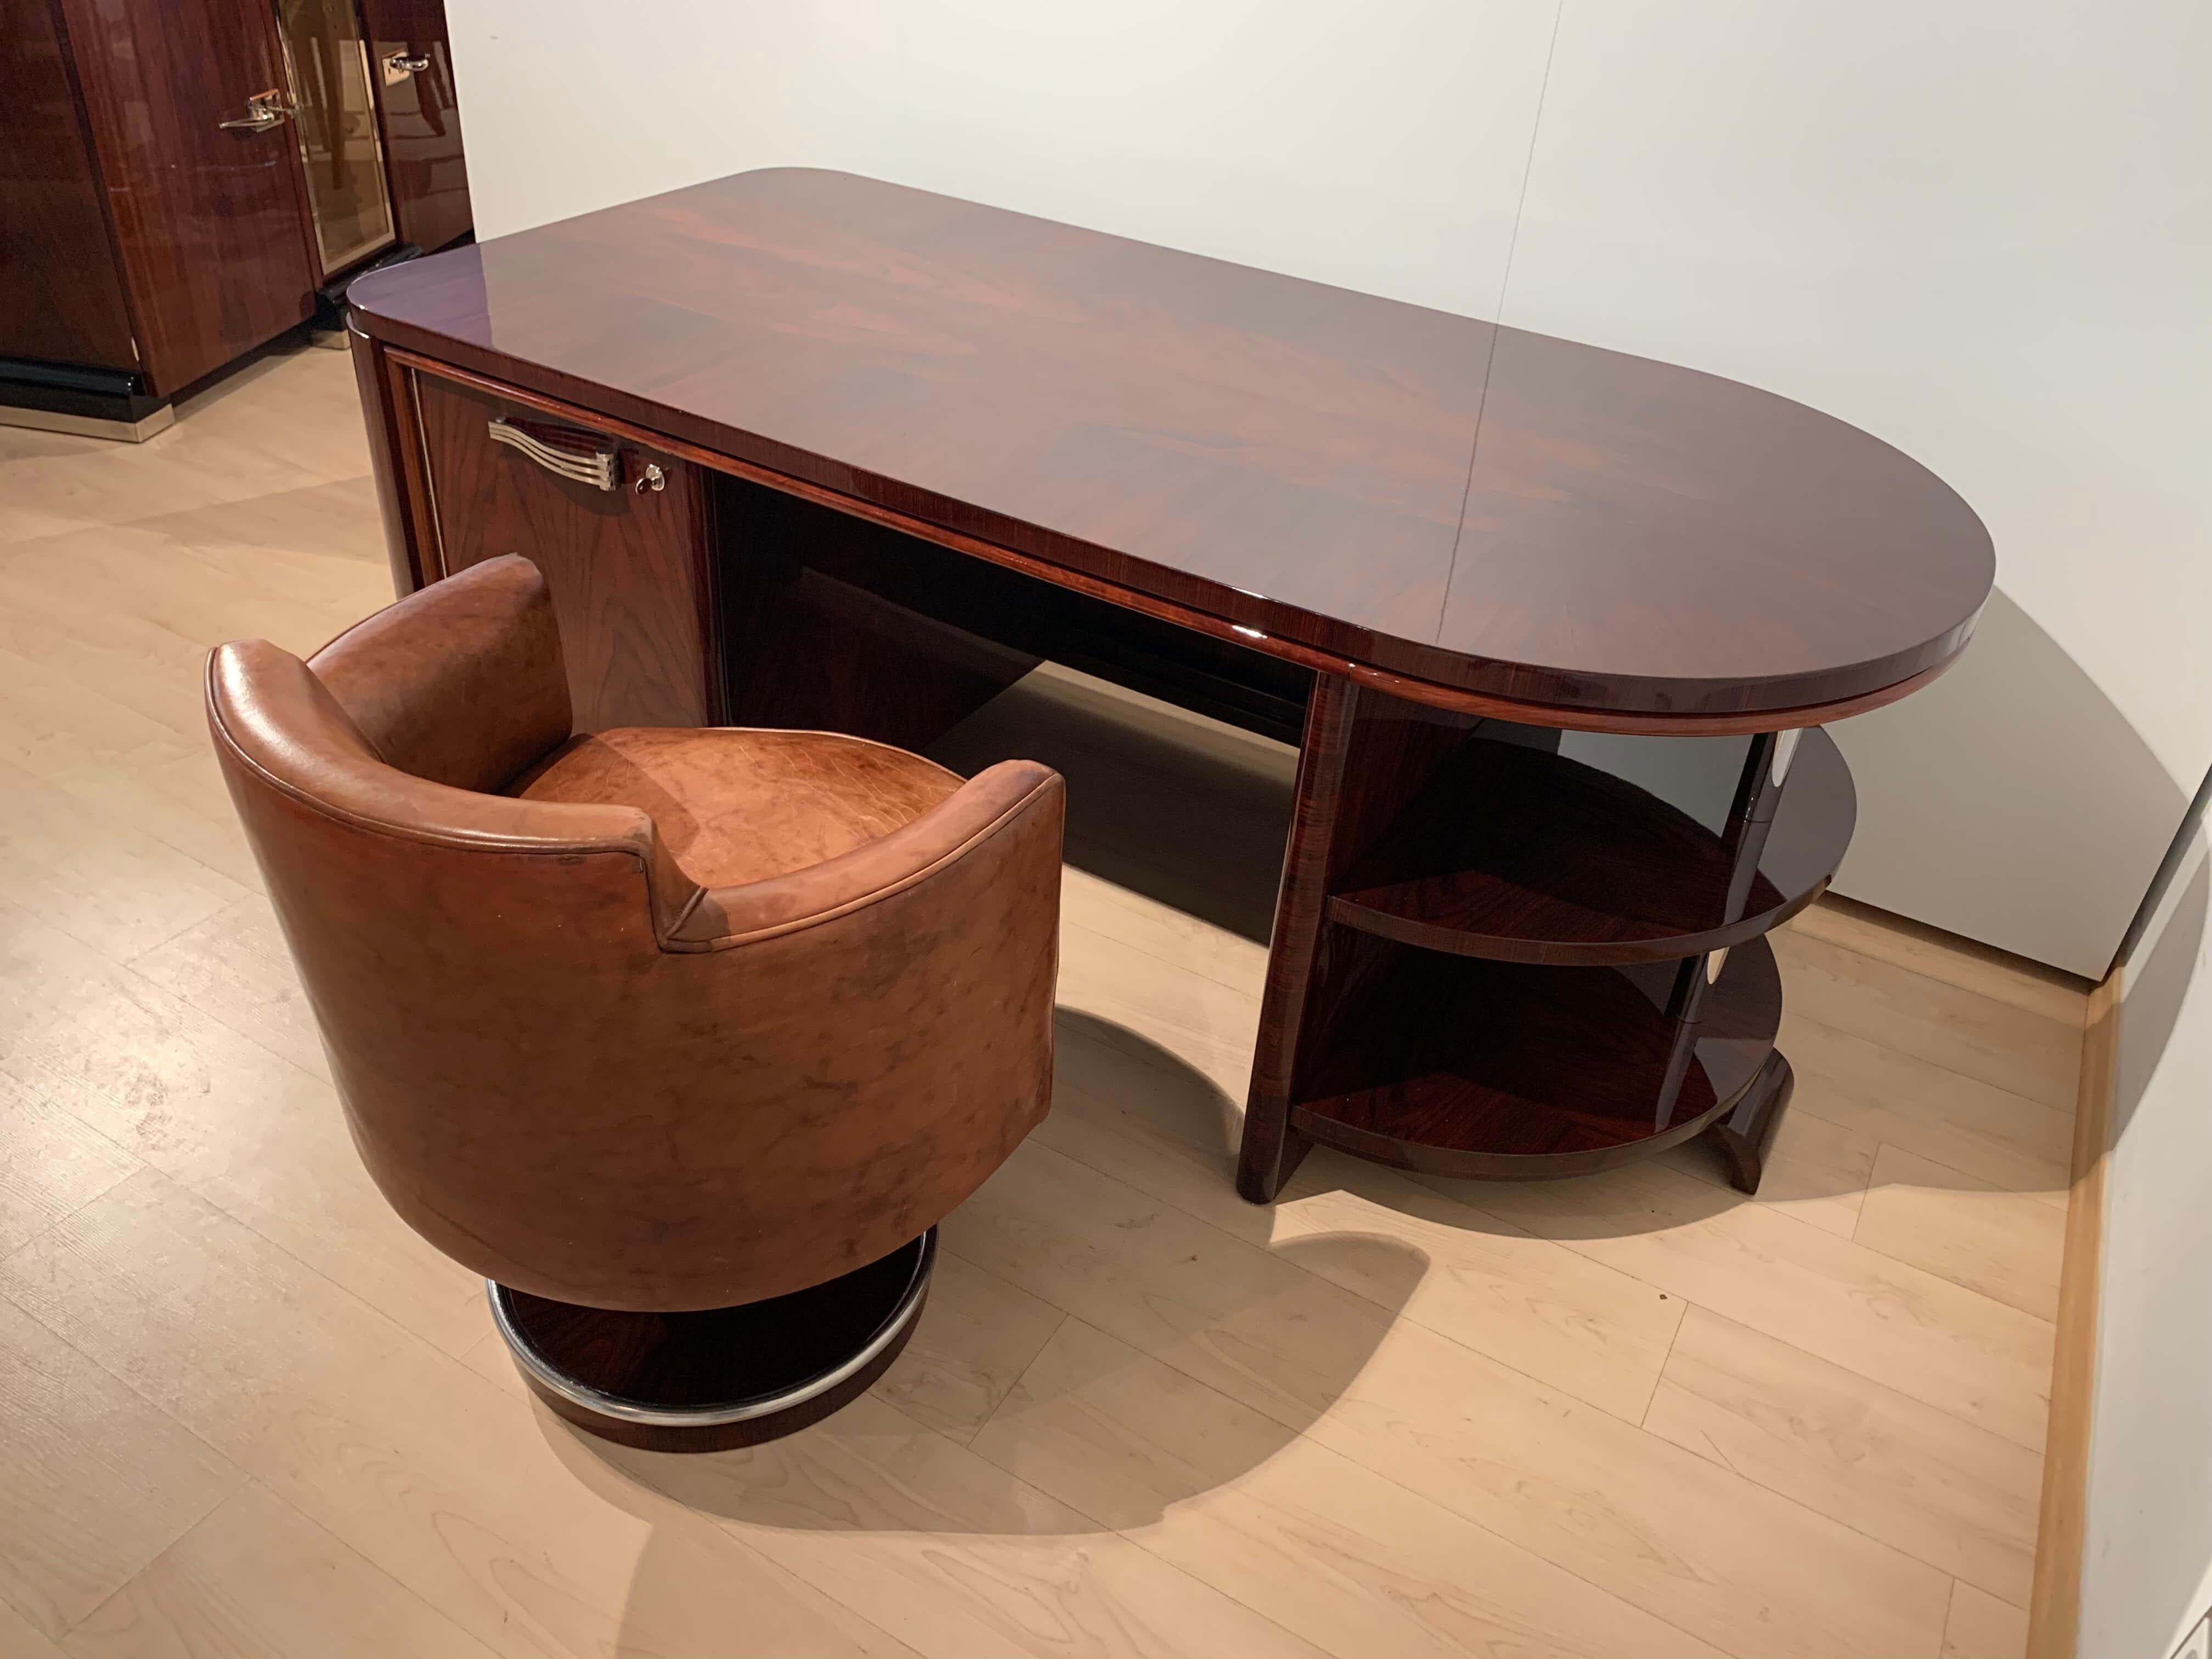 French Art Deco Desk with Leather Chair, Rosewood Veneer, France, 1930s For Sale